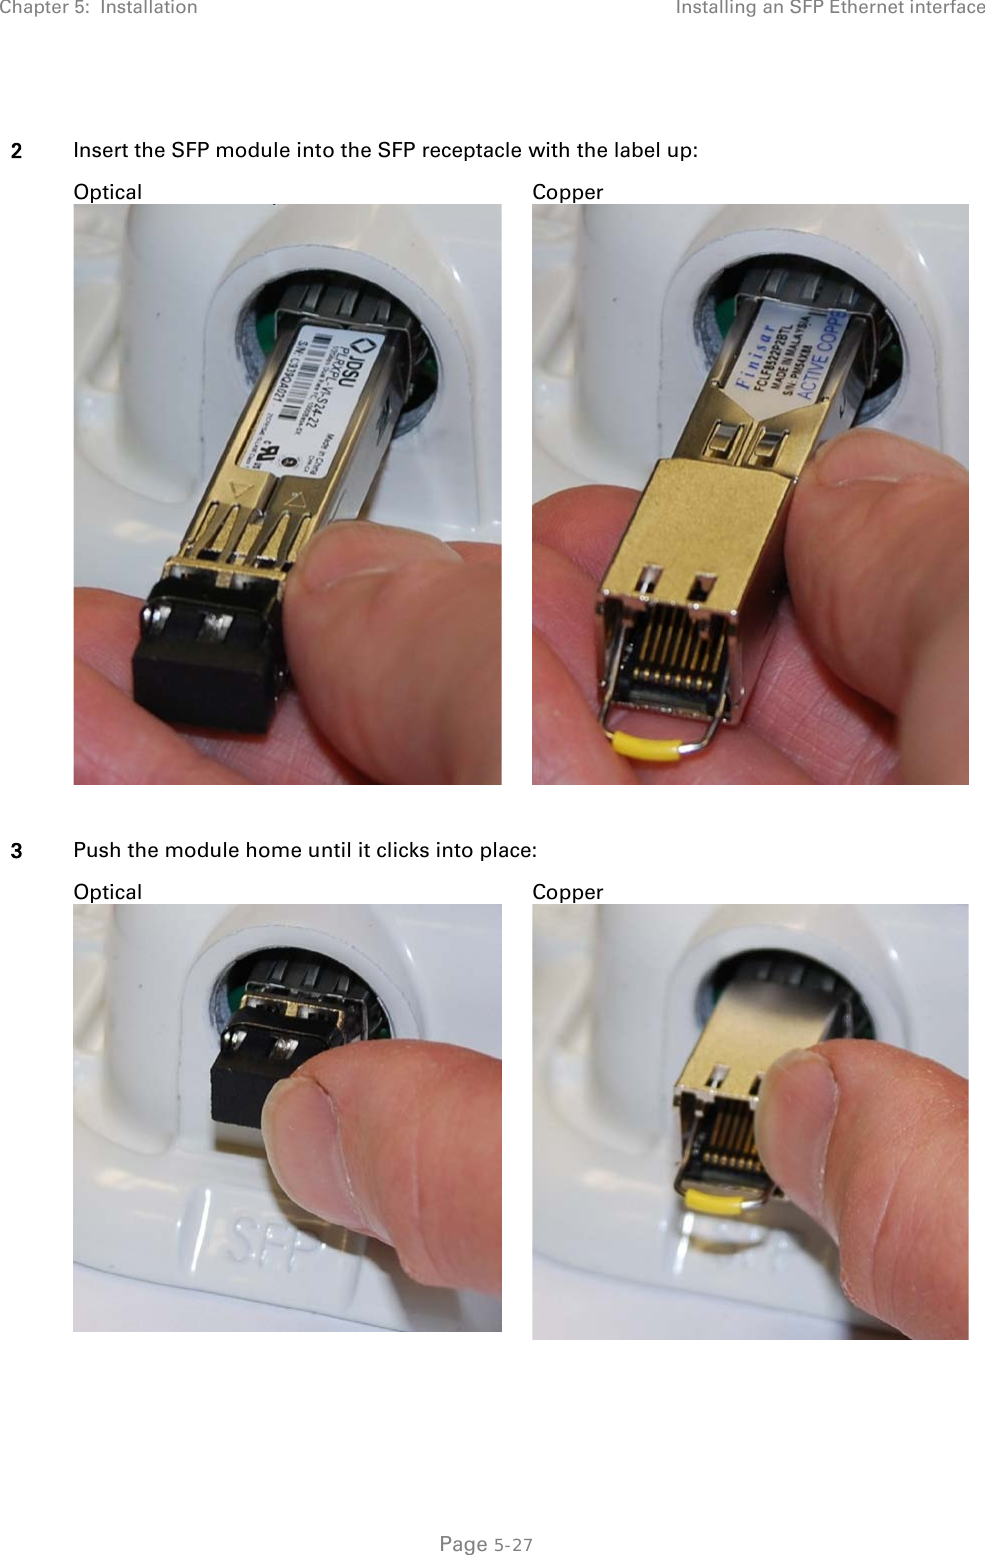 Chapter 5:  Installation Installing an SFP Ethernet interface   2 Insert the SFP module into the SFP receptacle with the label up:   Optical  Copper   3 Push the module home until it clicks into place:  Optical  Copper    Page 5-27 